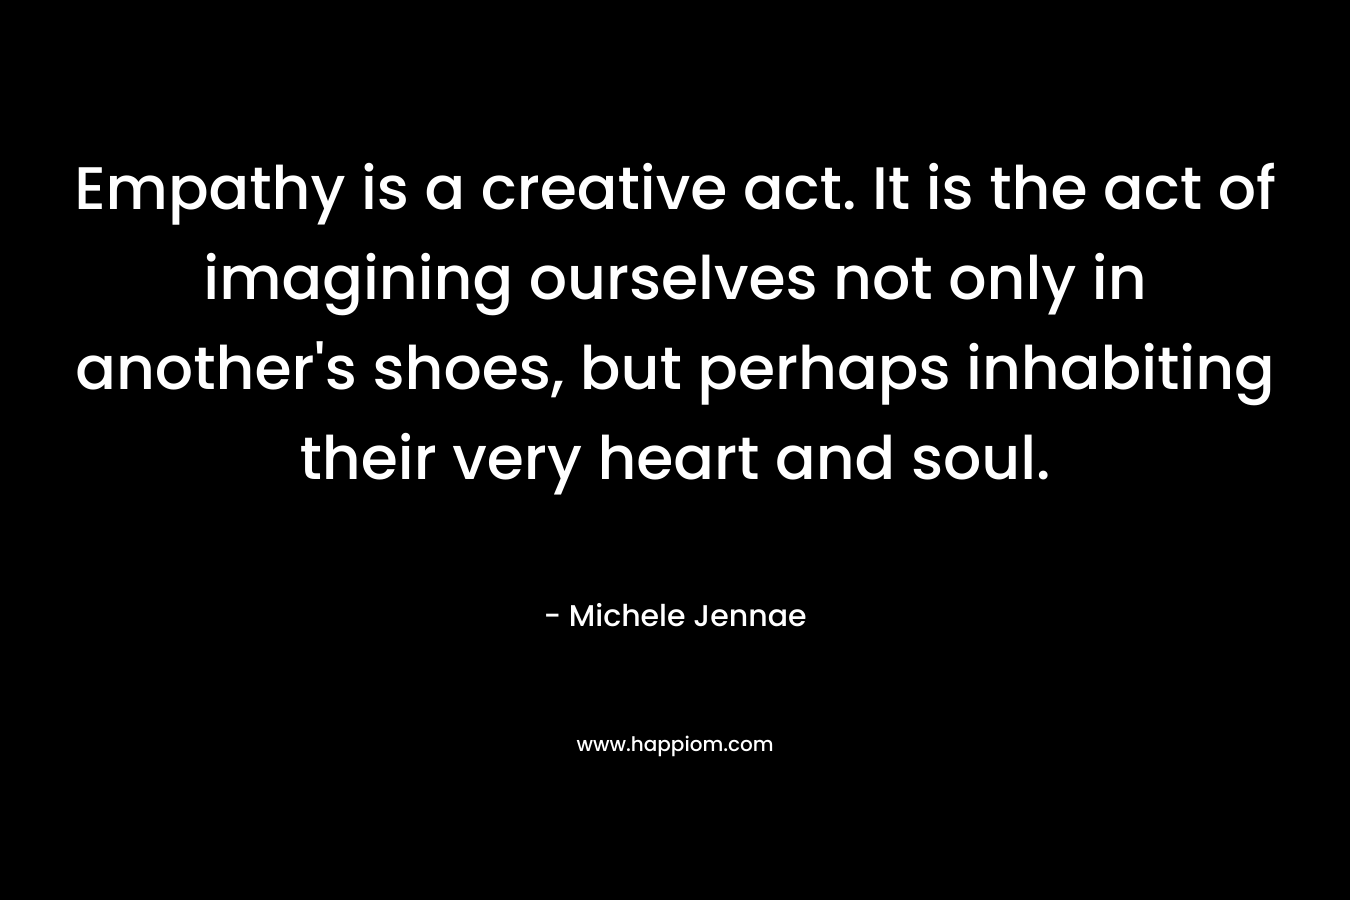 Empathy is a creative act. It is the act of imagining ourselves not only in another’s shoes, but perhaps inhabiting their very heart and soul. – Michele Jennae